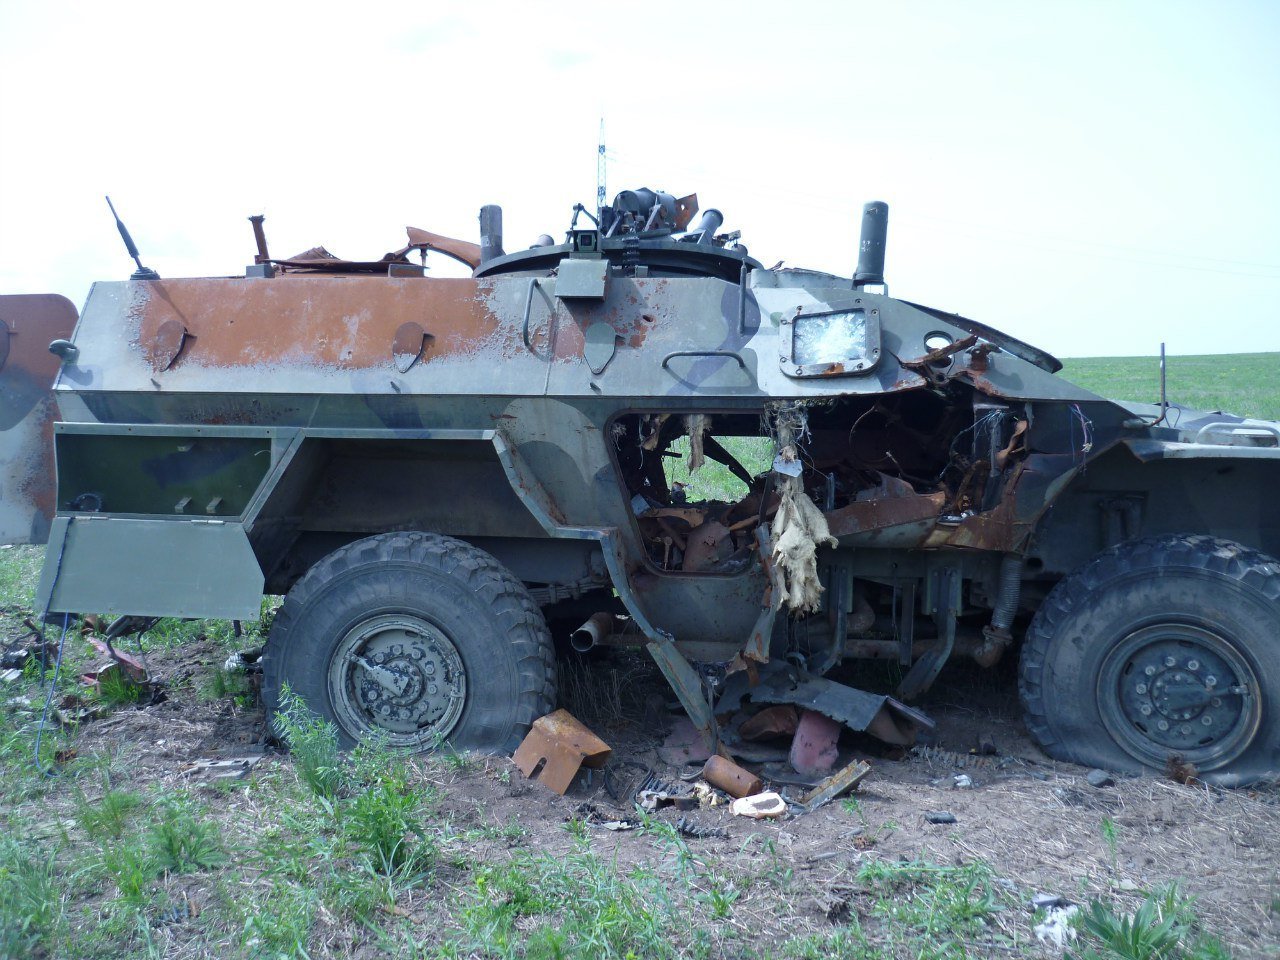 Another BPM-97 downed on 28 January 2015 in the same area – north of Sanzharivka, without marking. This one was earlier spotted in occupied Luhansk on 1 January 2015 – earlier on the same day one of “LNR” chieftains, Alуksandr Bednov, was assassinated near Lutuhyne not far from Luhansk. Bednov opposed then Moscow-installed “LNR head” Igor Plotnitsky, and the mercenaries of PMC Wagner had reportedly liquidated him. ~